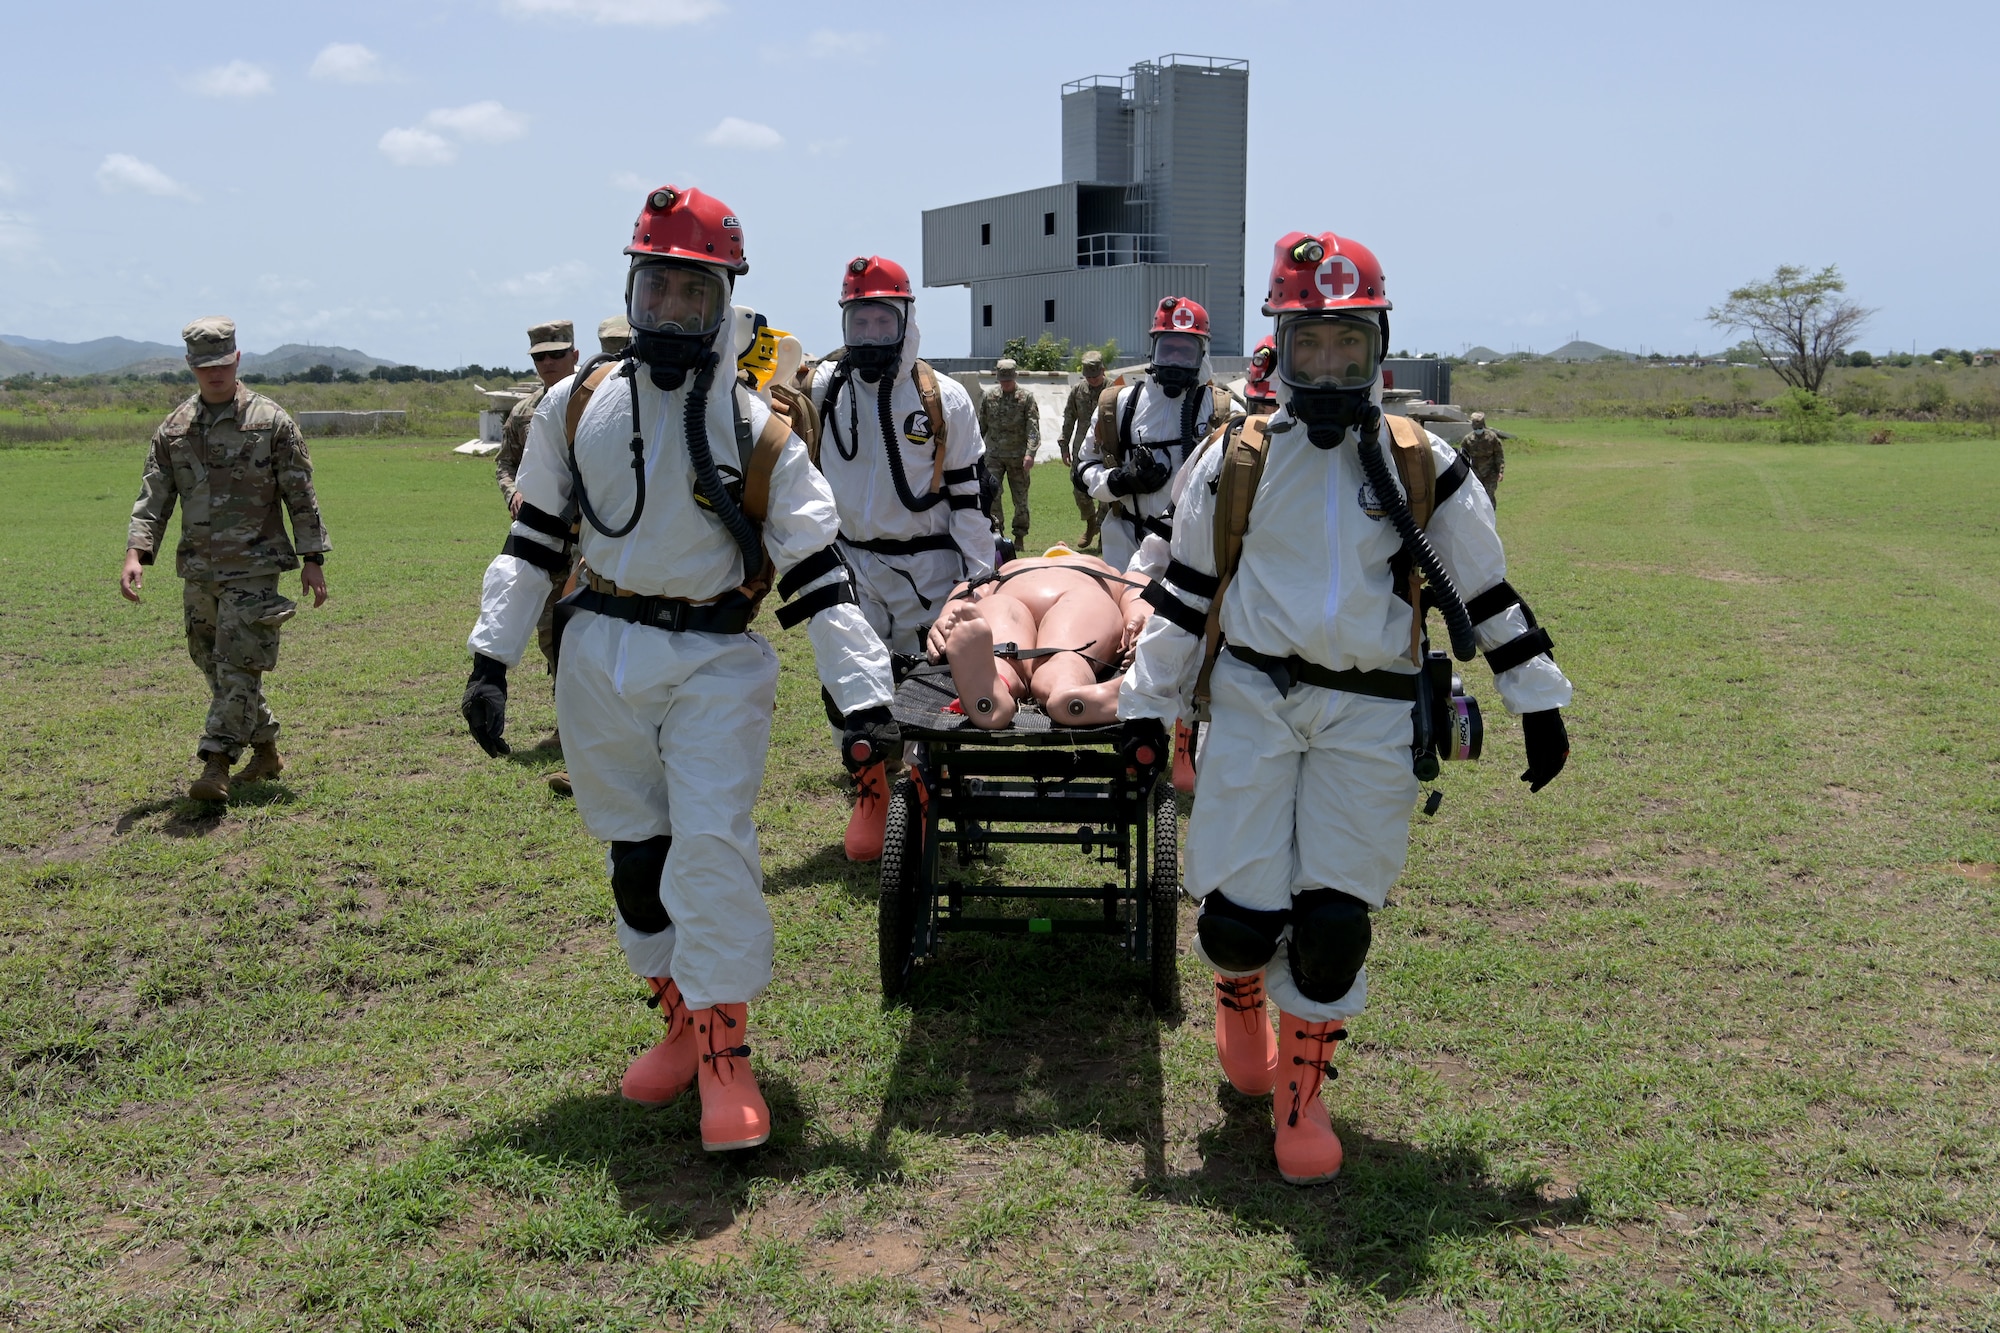 U.S. Airmen with the 156th Medical Group Detachment 1, Chemical, Biological, Radiological, Nuclear and high-yield Explosive Enhanced Response Force Package, transport a simulated victim during a search and extraction training exercise at Camp Santiago Joint Training Center, Salinas, Puerto Rico, Aug. 19, 2021.